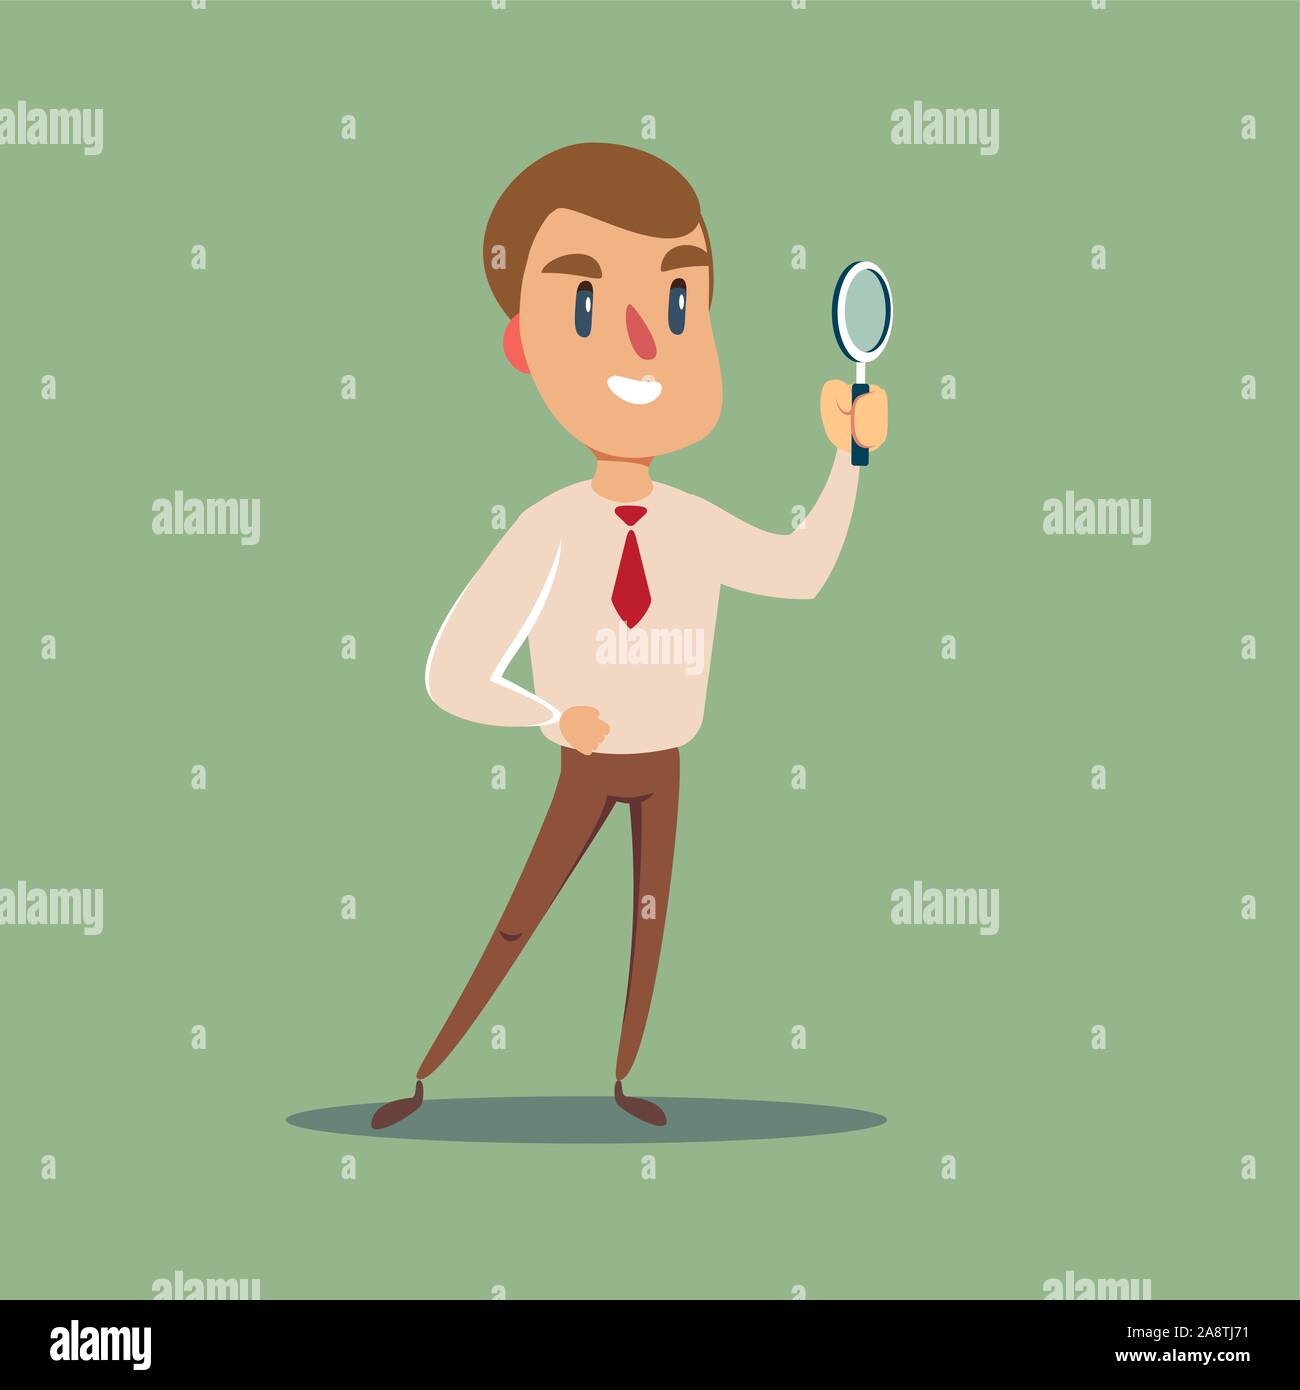 Manager character looking through a magnifying glass. Stock Vector